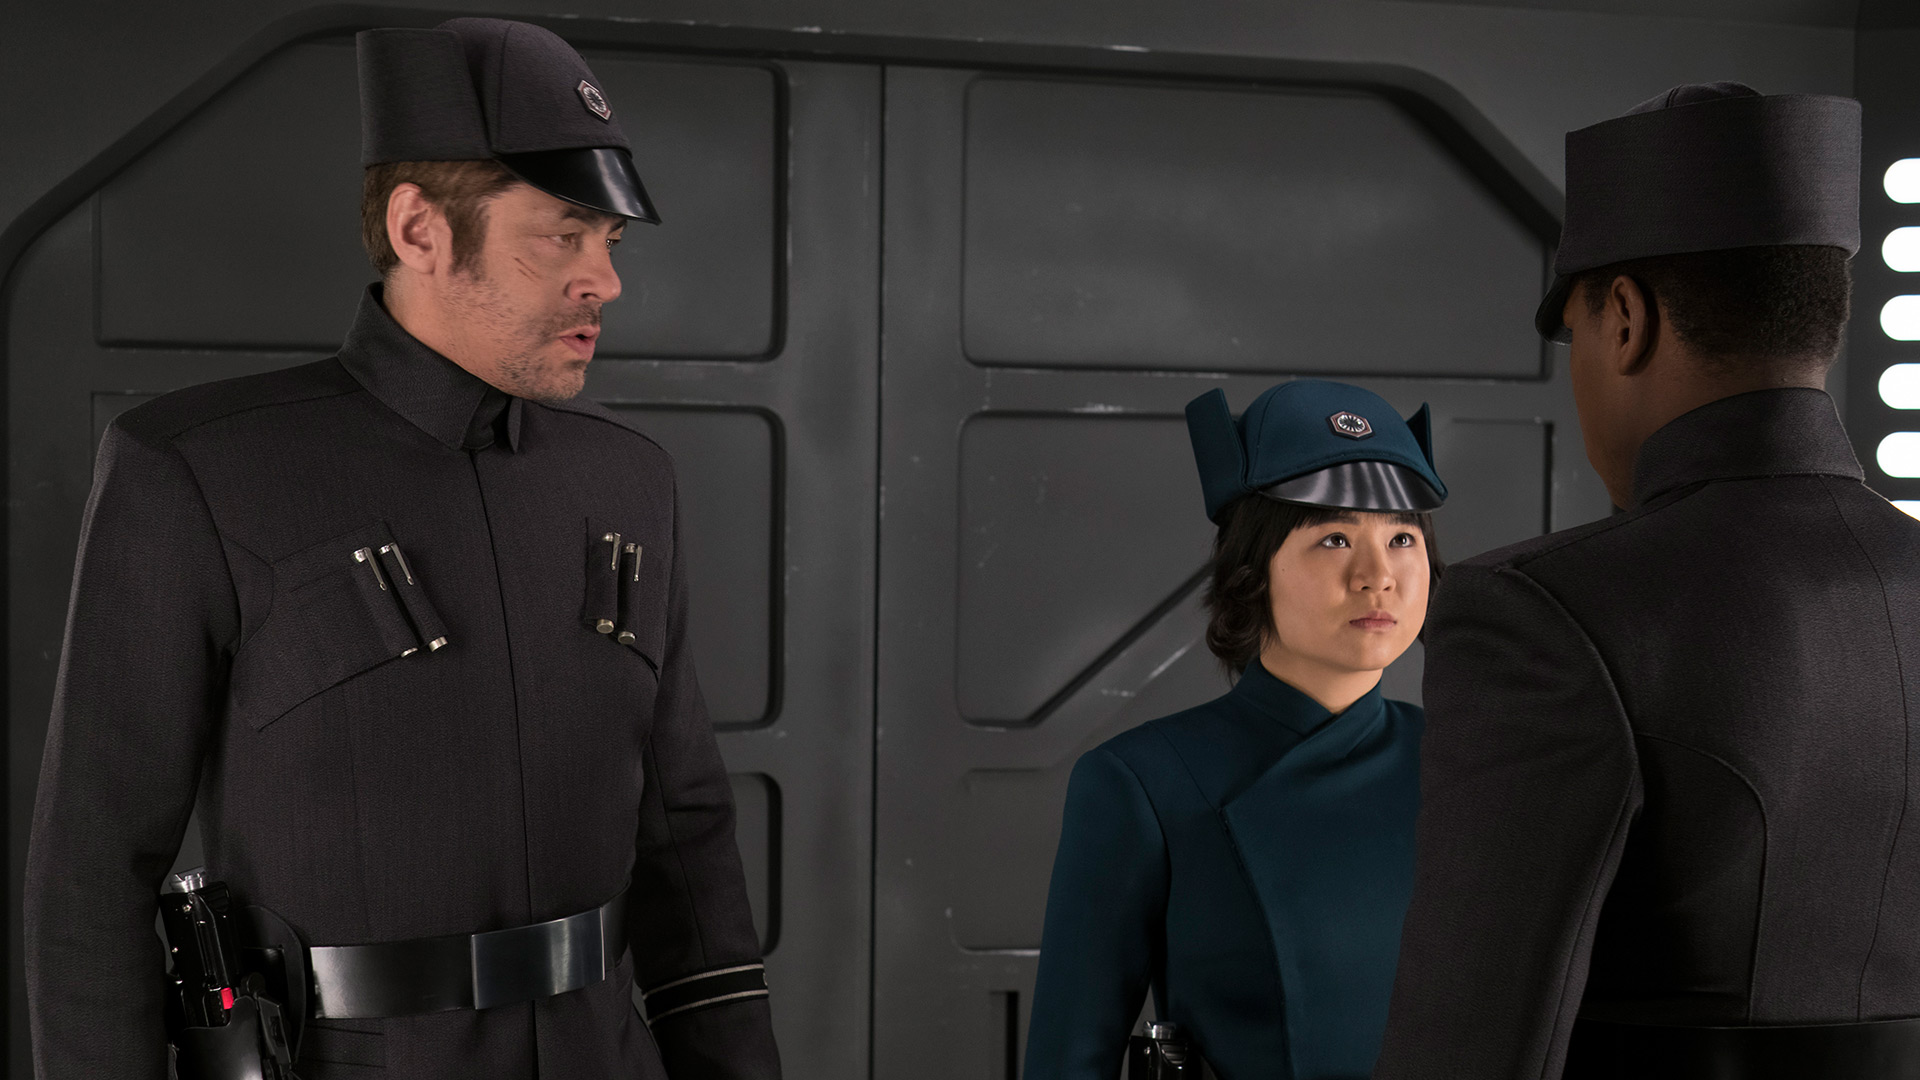 DJ, Rose Tico, and Finn in disguise